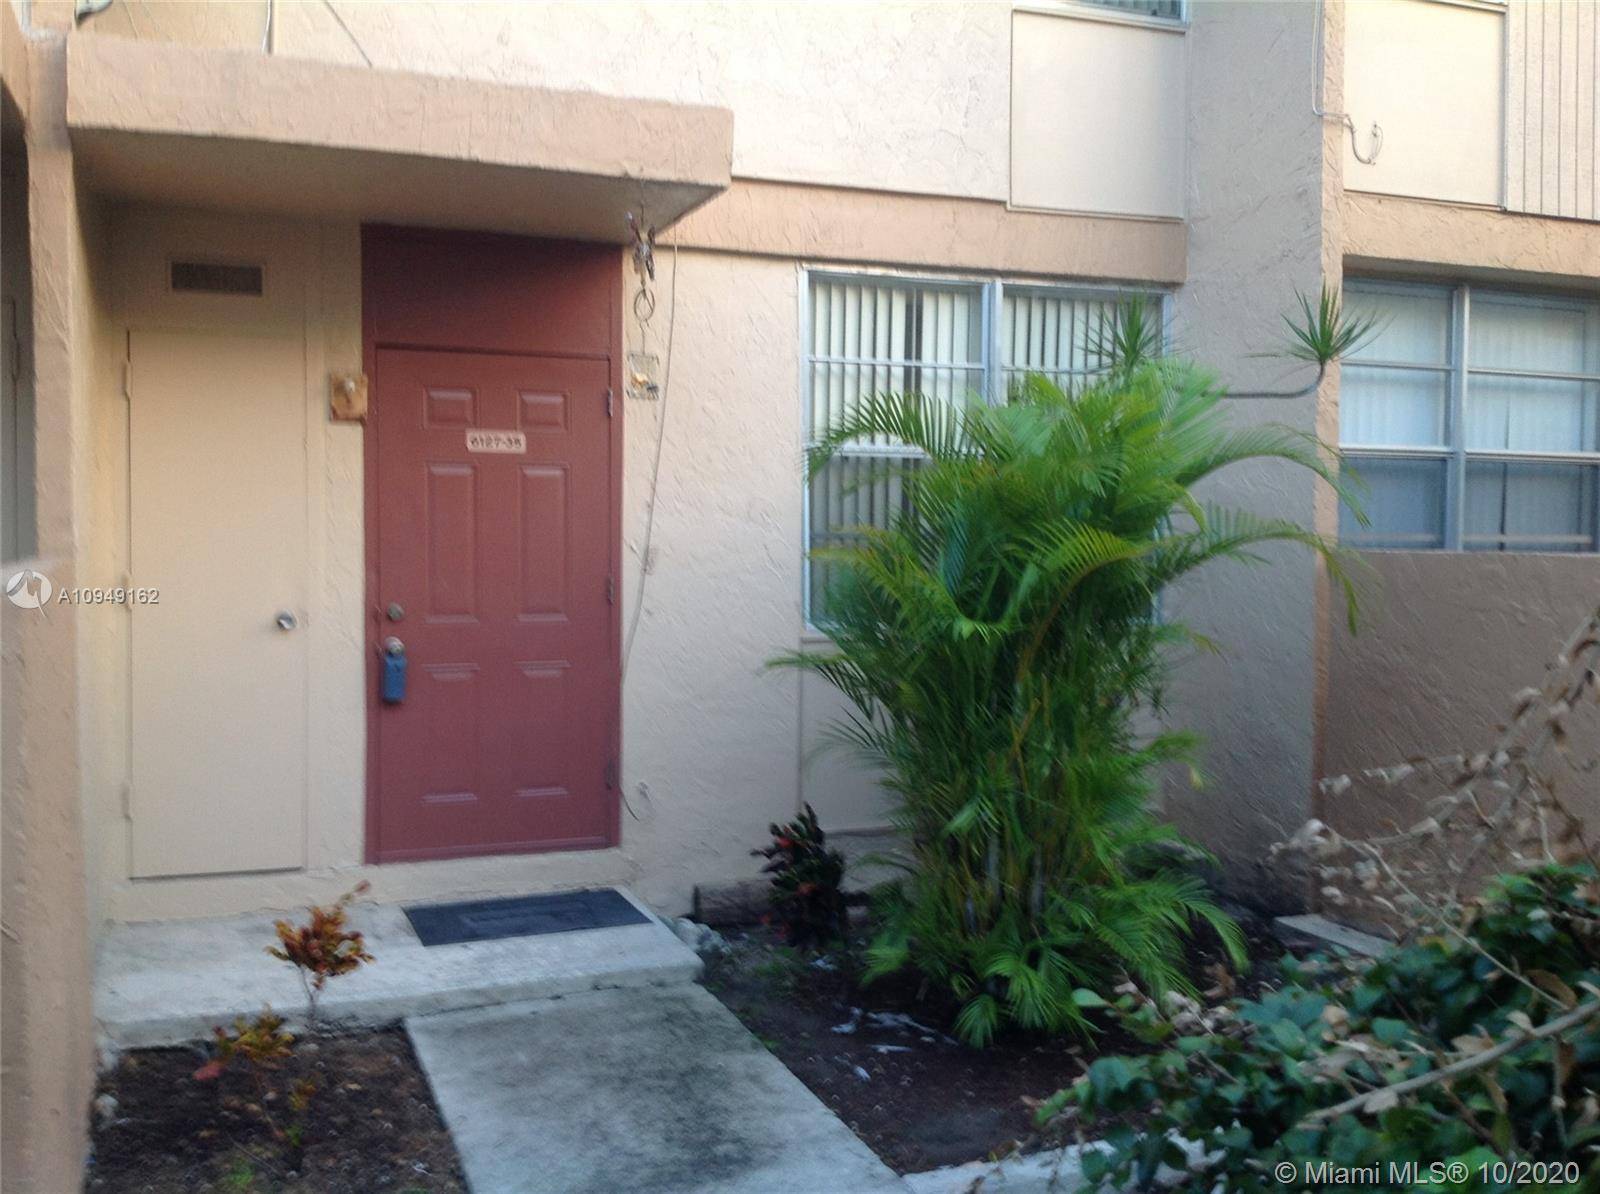 ALL INSPECTIONS TO BE DONE PRIOR TO SUBMITTING OFFERS, ALL ATTACHED FORMS IN THE ATTACHMENT TO BE SUBMITTED FOR CONSIDERATION, CENTRALLY LOCATED 2 BEDROOM AND 1 BATH CONDO IN THE ...